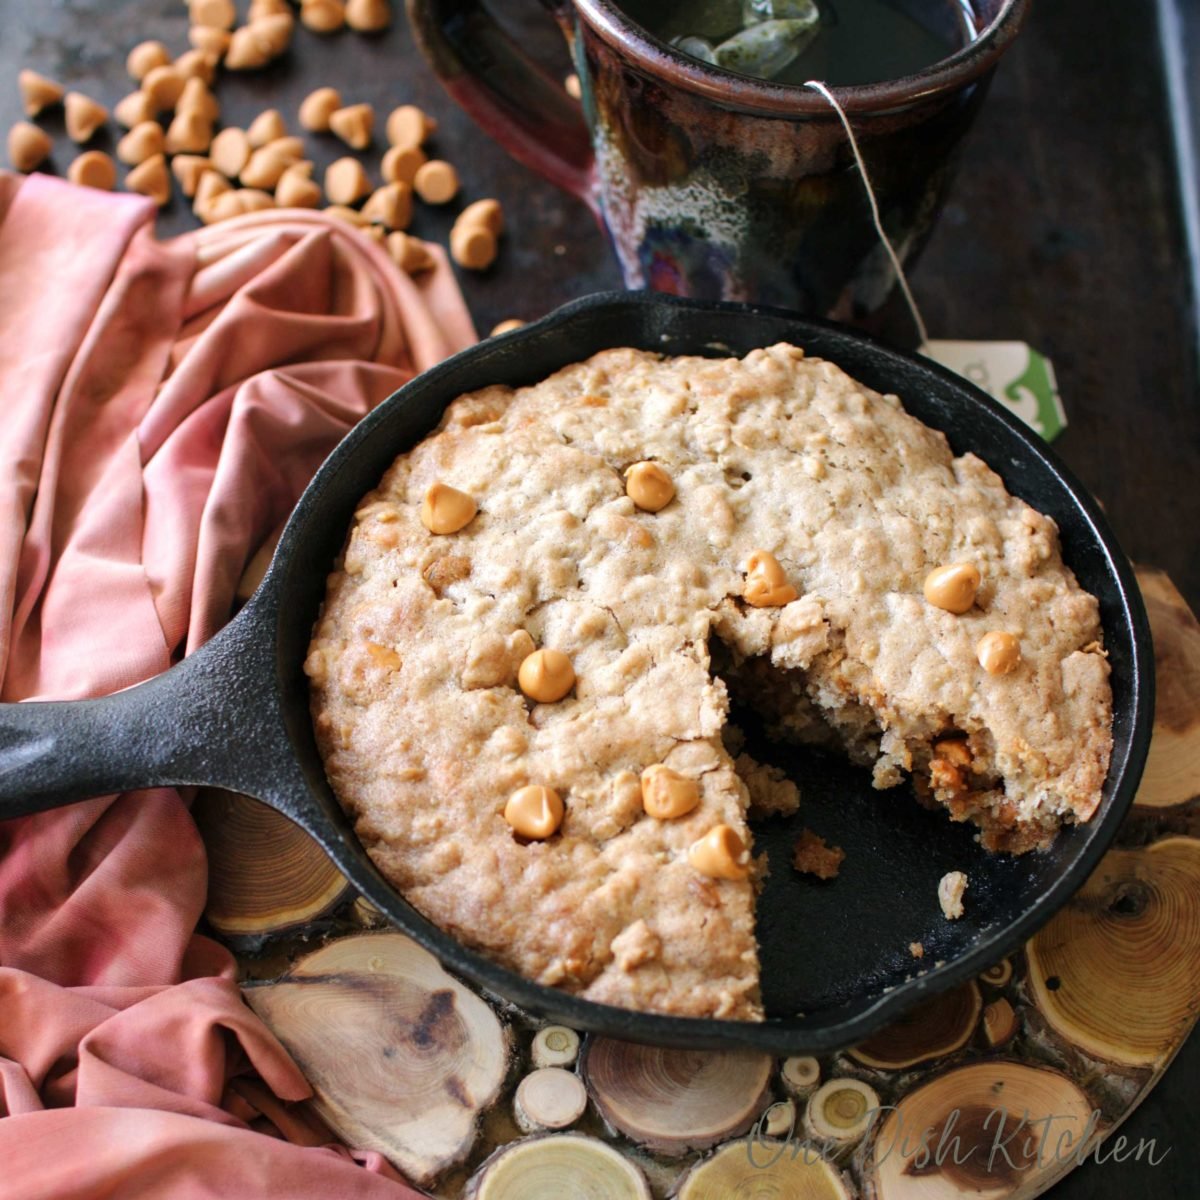 a small skillet with a butterscotch oatmeal cookie baked inside.